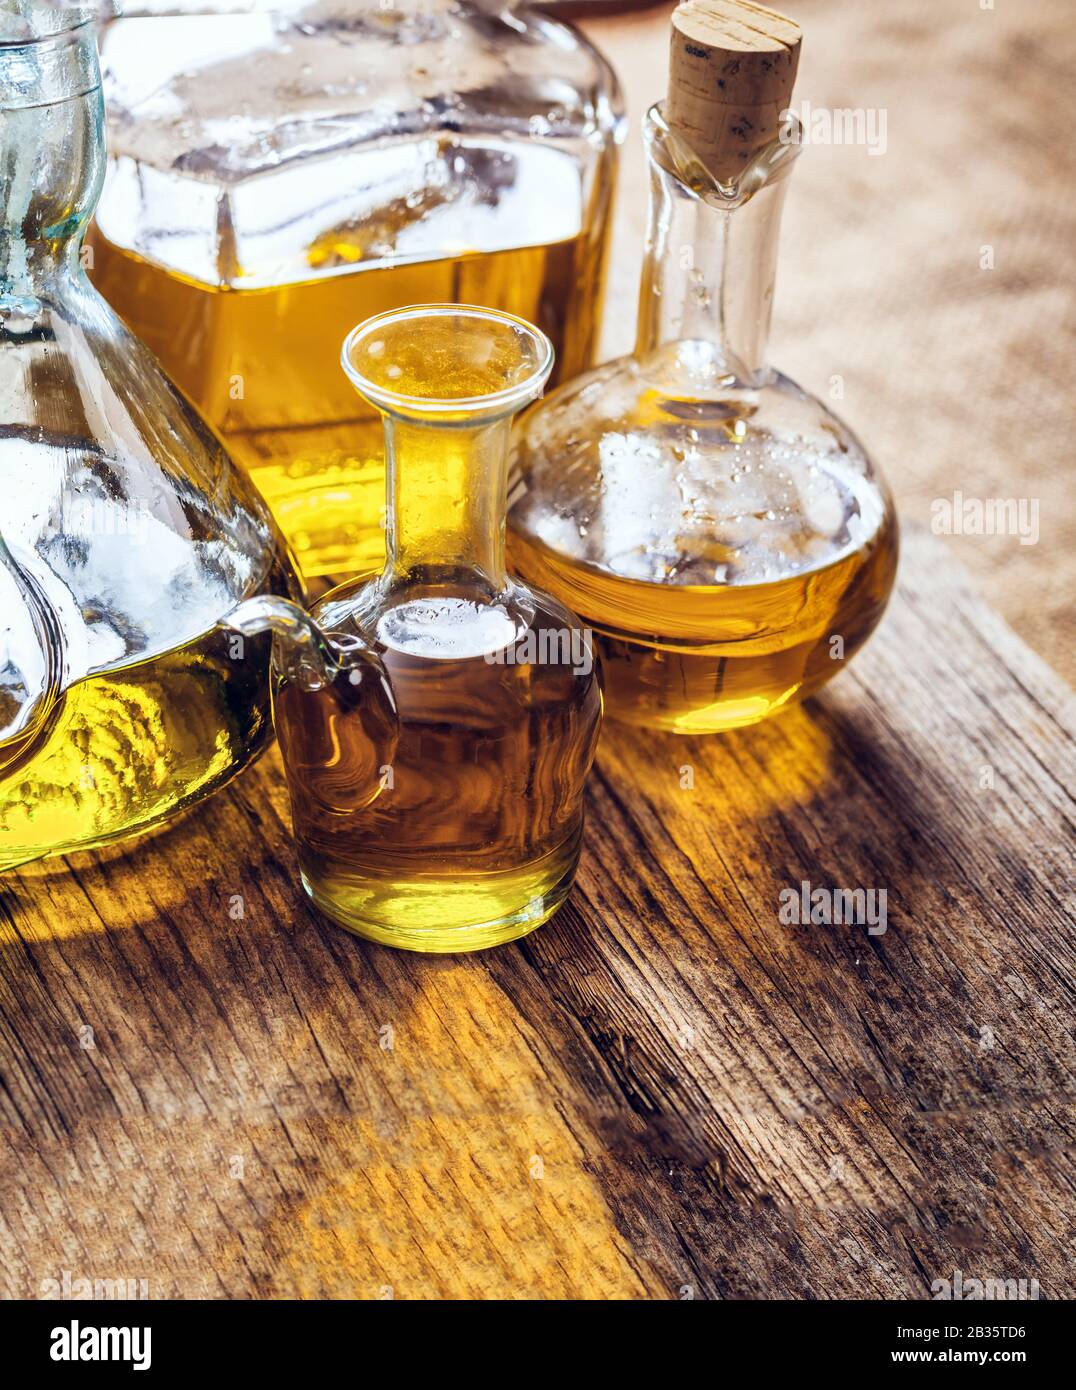 Olive oil bottles variety on a wooden table, closeup verical view. Assortment of extra virgin healthy olive oil on wood Stock Photo